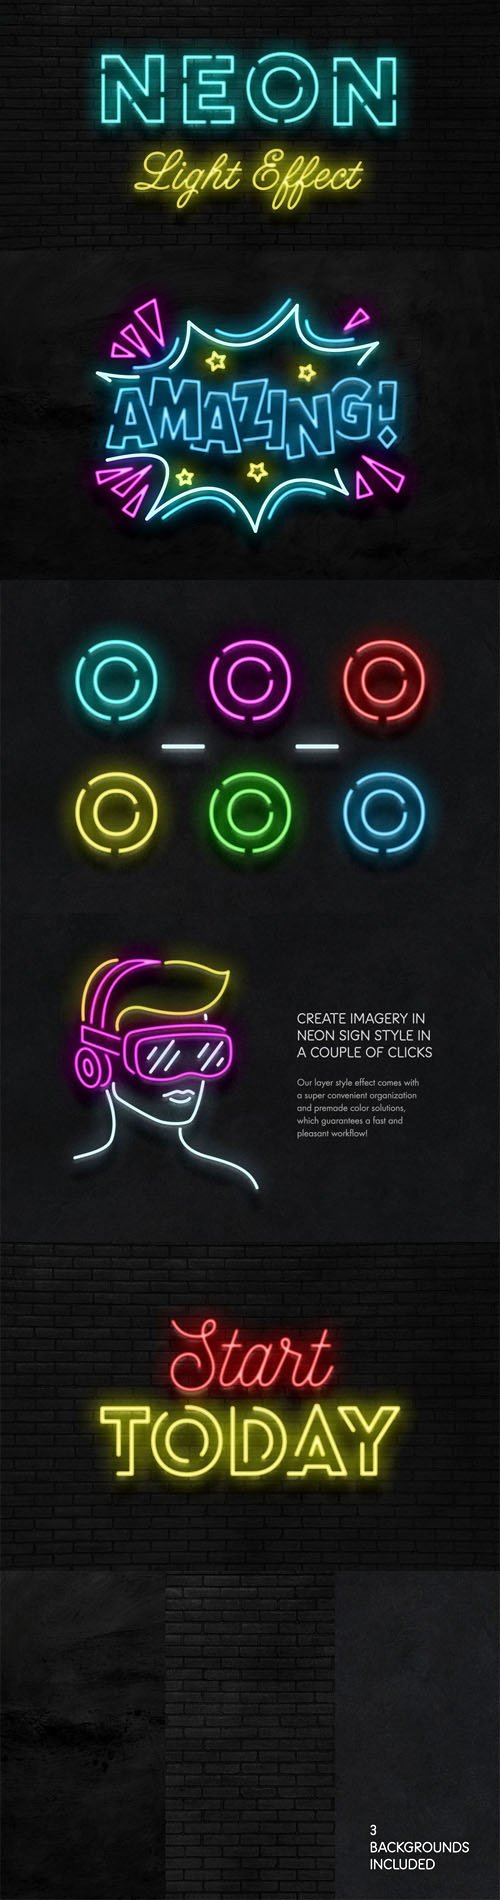 Realistic Neon Sign Effect PSD Templates